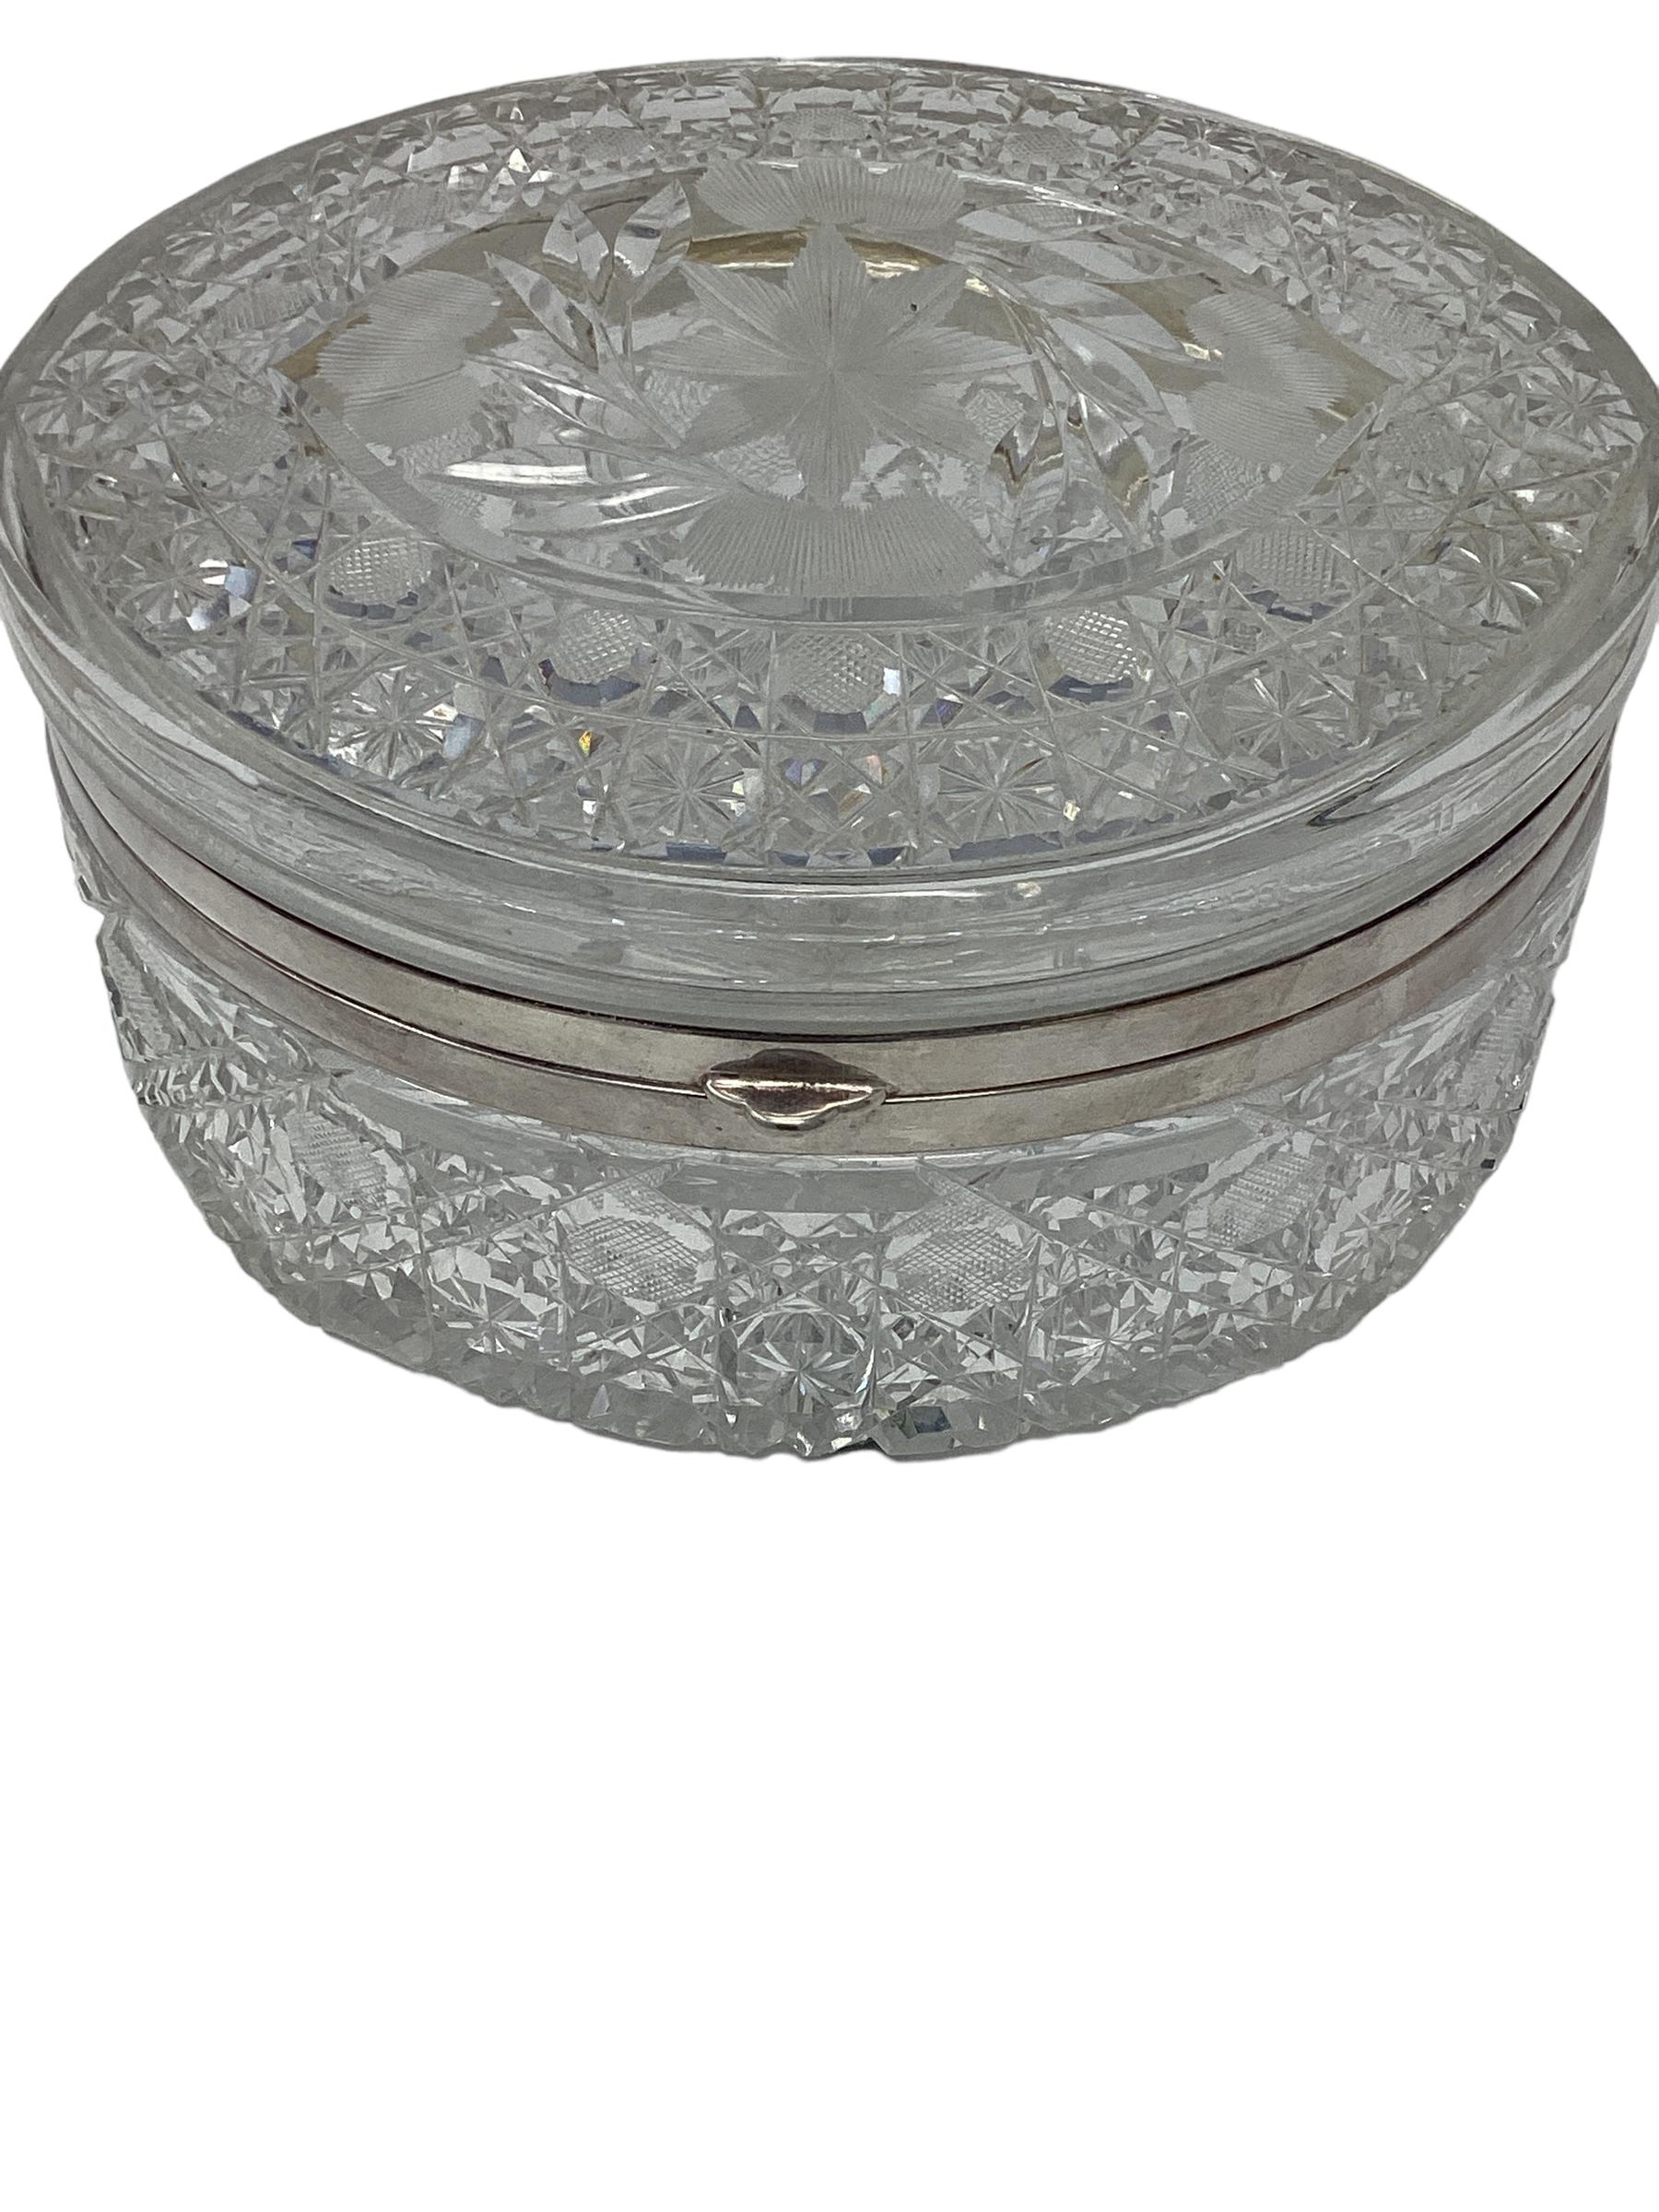 Large Oval Cut Crystal Box with Silver Mount.  Cut crystal boxes are typically made from high-quality lead crystal glass. This type of glass is known for its clarity, brilliance, and ability to refract light beautifully. The deep wheel cut pattern